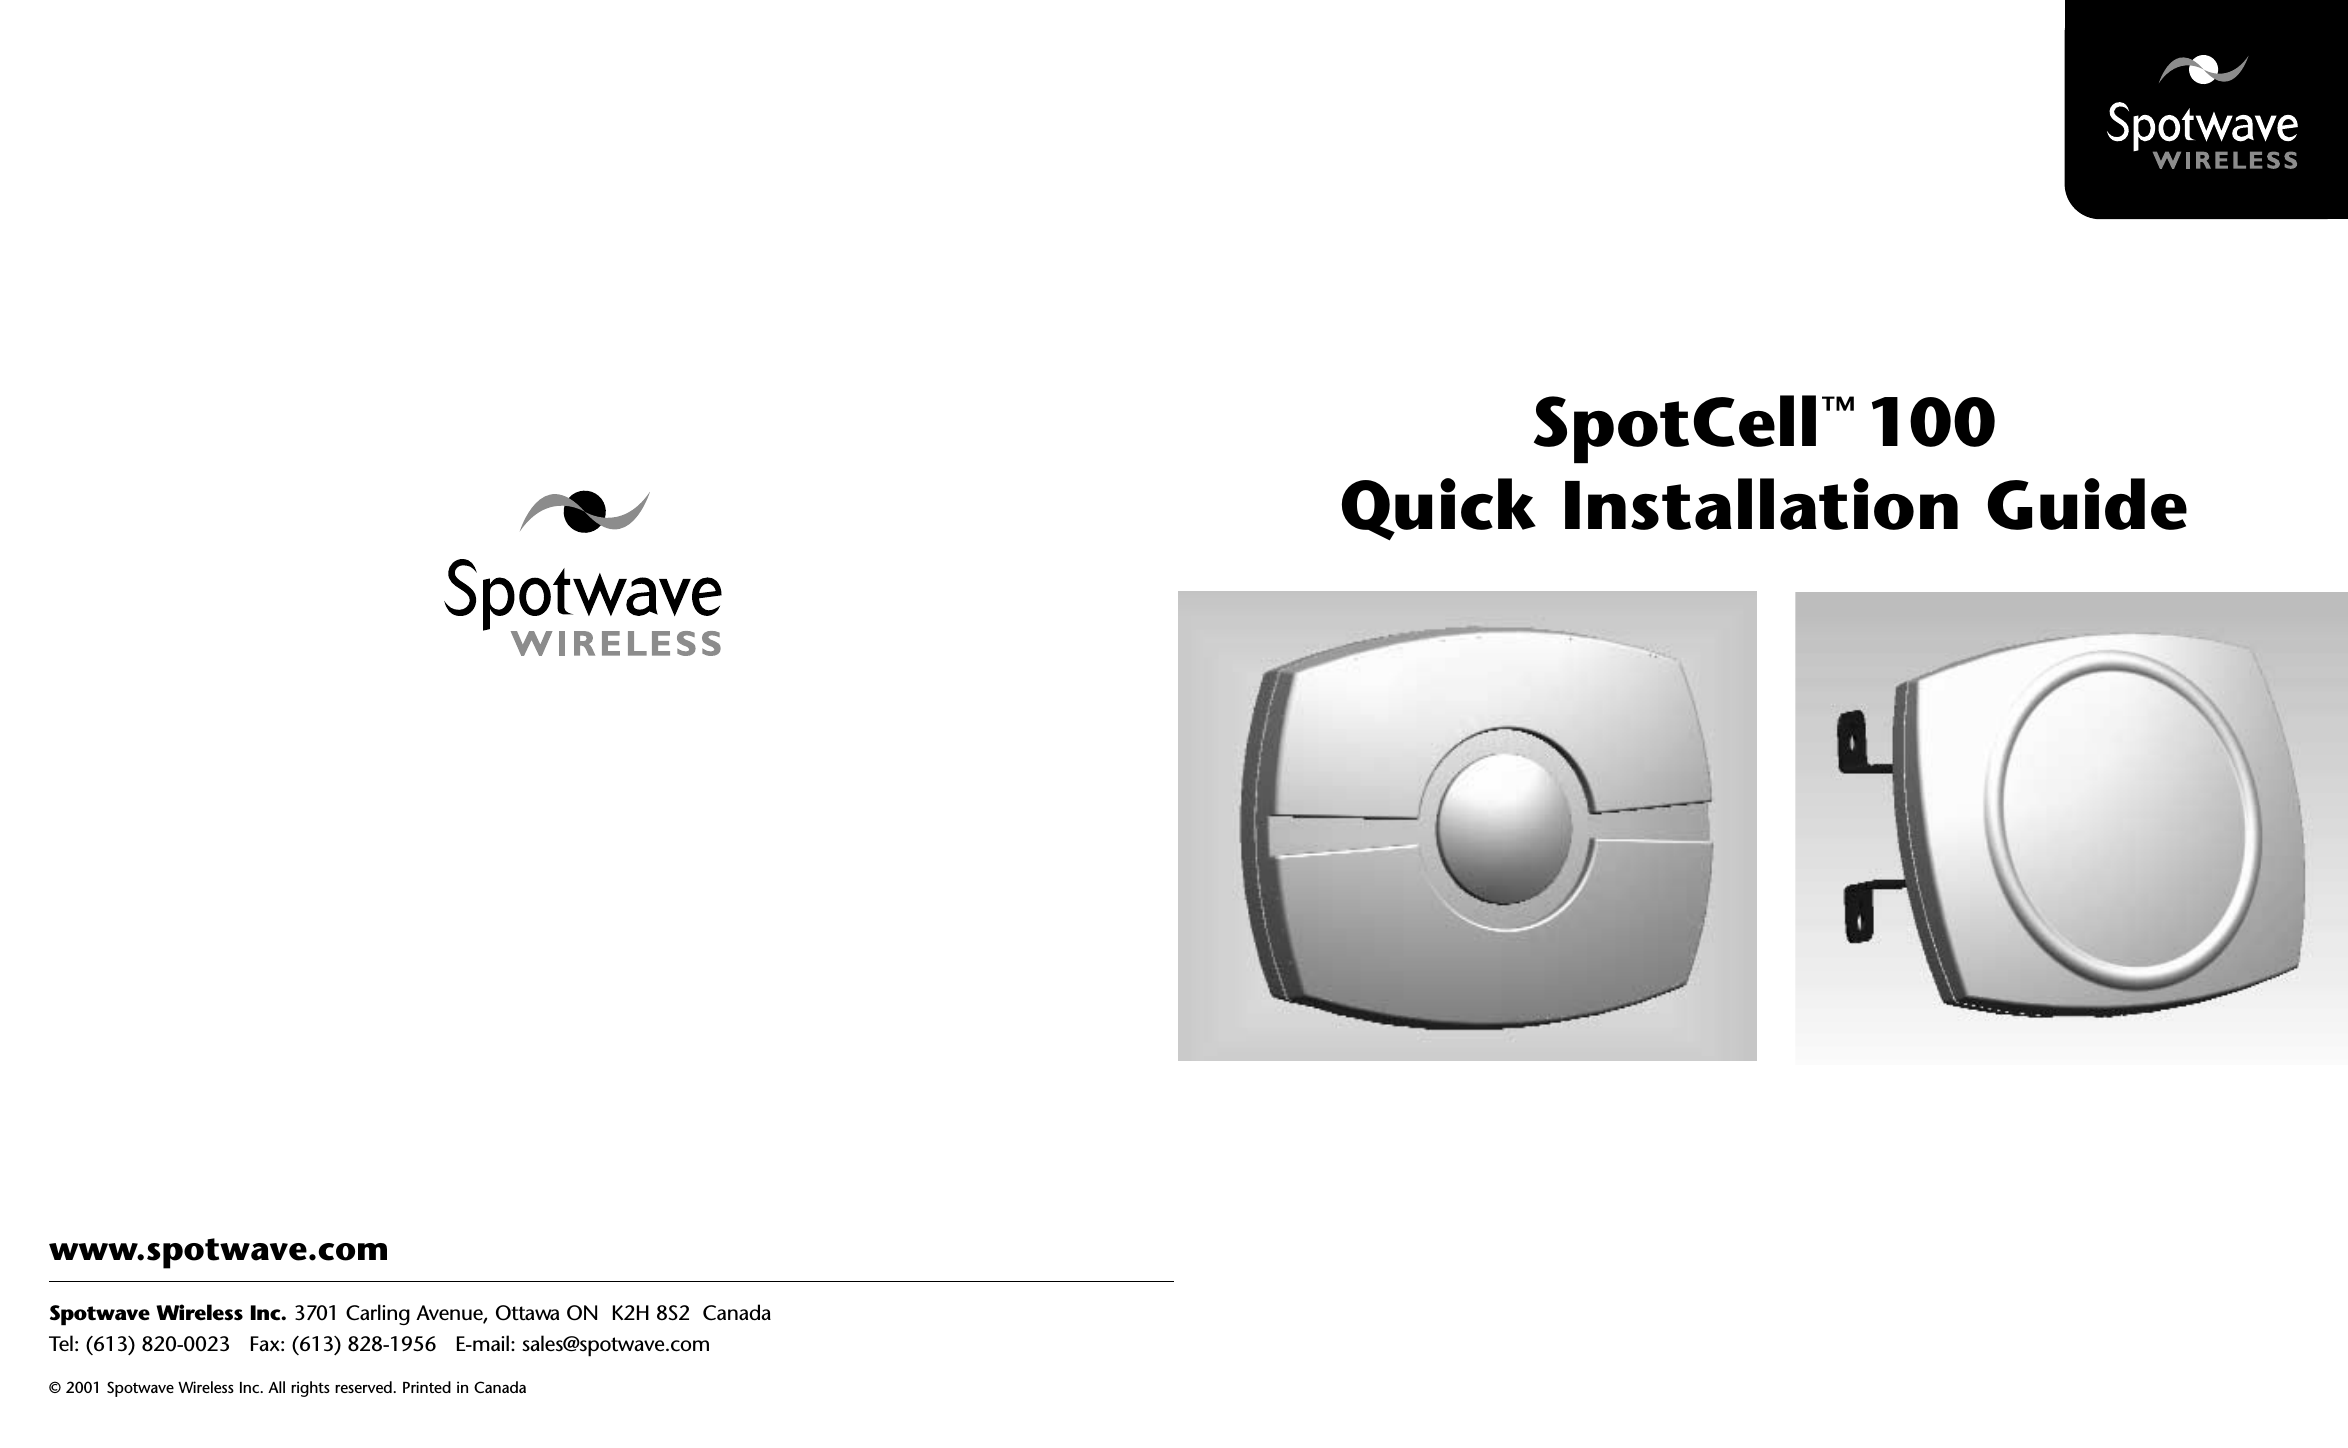 SpotCell™ 100Quick Installation Guidewww.spotwave.comSpotwave Wireless Inc. 3701 Carling Avenue, Ottawa ON  K2H 8S2  Canada   Tel: (613) 820-0023   Fax: (613) 828-1956   E-mail: sales@spotwave.com© 2001 Spotwave Wireless Inc. All rights reserved. Printed in Canada